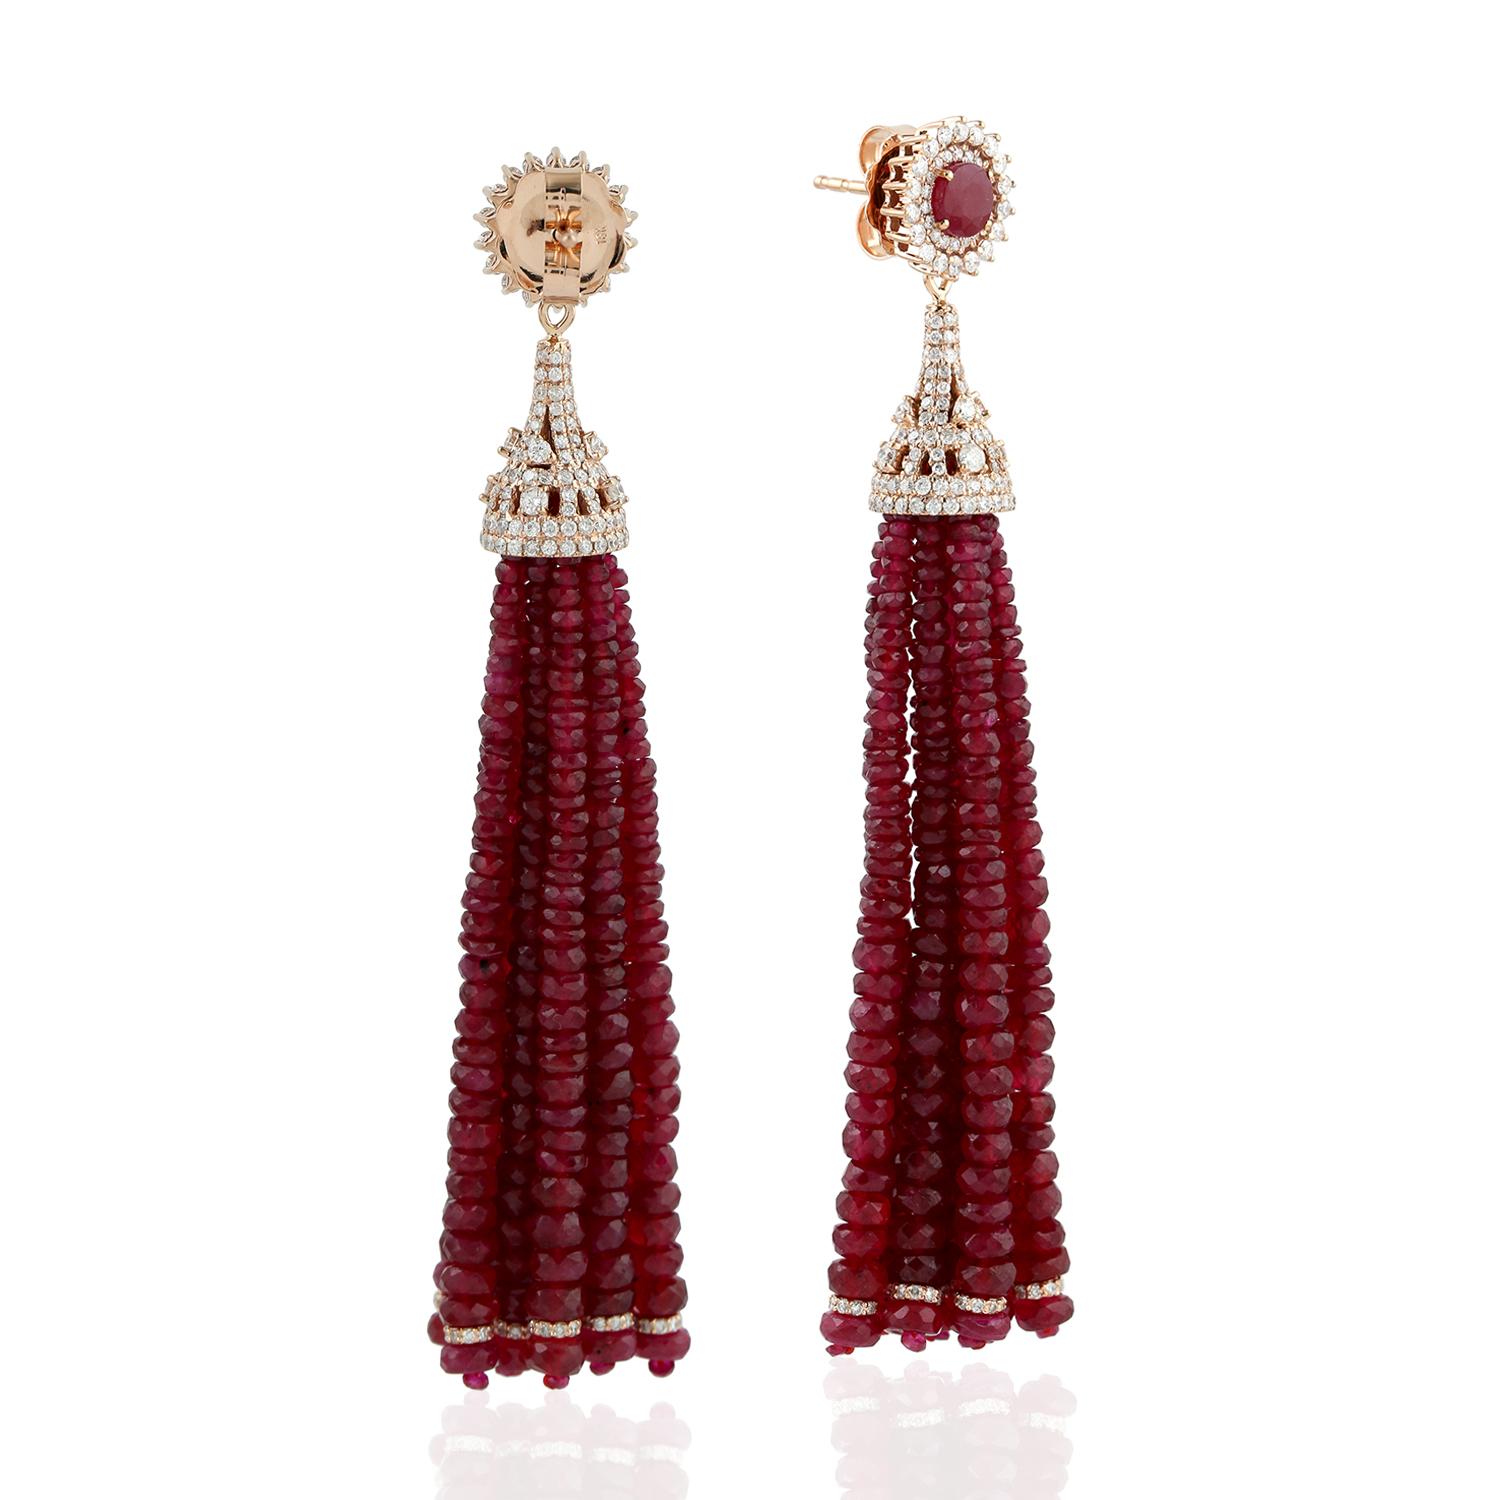 This designer Ruby Tassel Dangle Earring in 18K Gold with Diamonds would make your heart miss a beat. This earring is full of happiness and love.

Closure: Push Post

18K Gold:10.728gms
Diamond:2.96cts
Ruby:143.07cts
Thread:0.05gms
